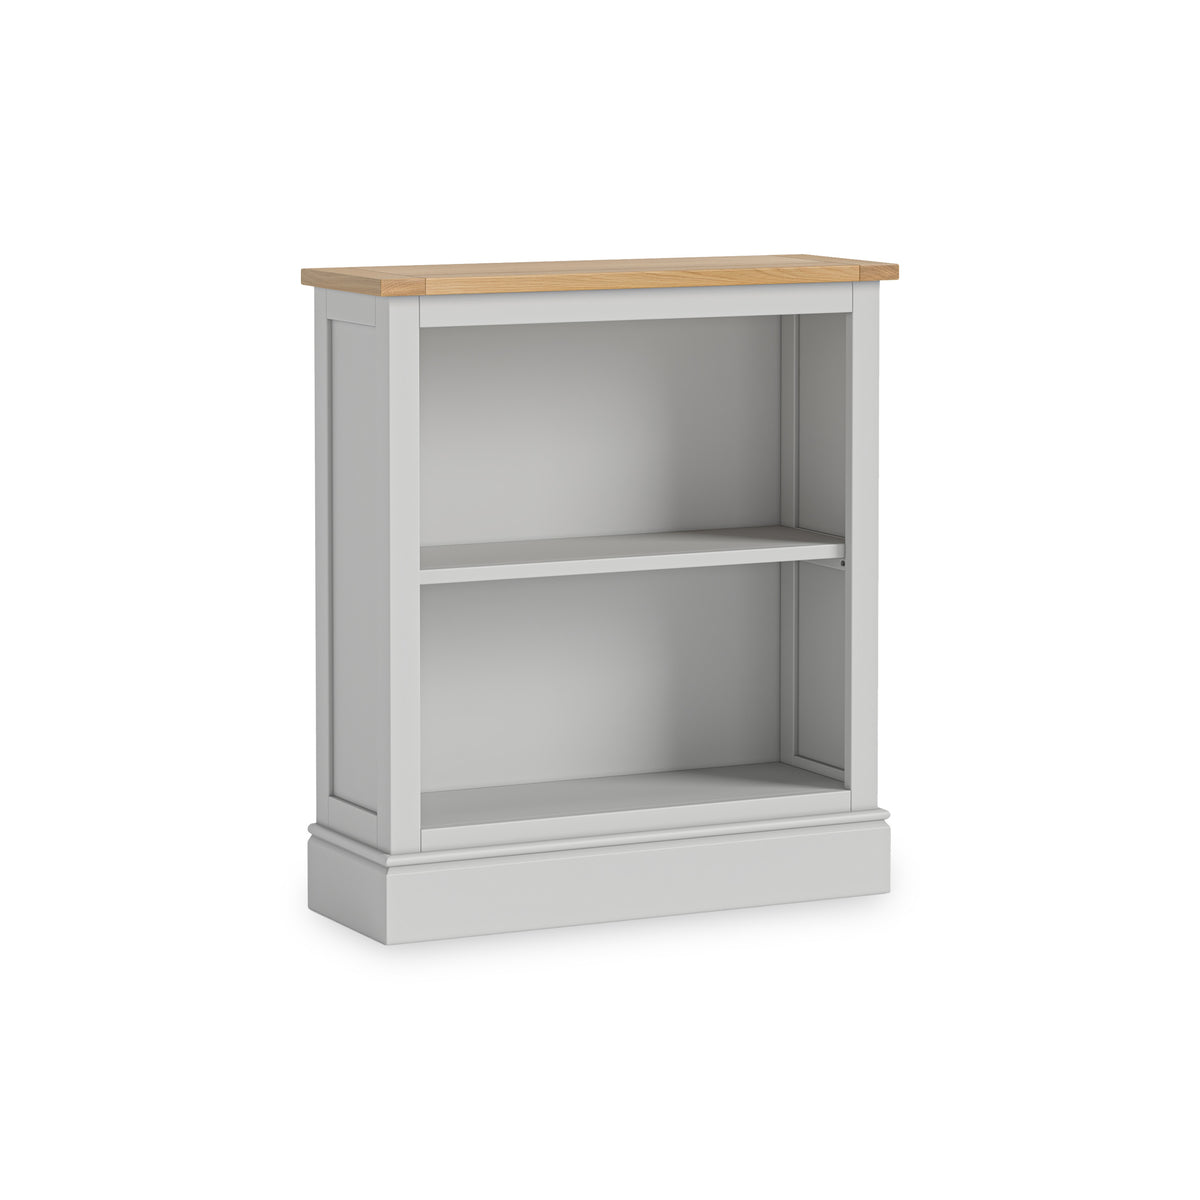 Bude Grey Low Bookcase with Painted Shelves from Roseland Furniture